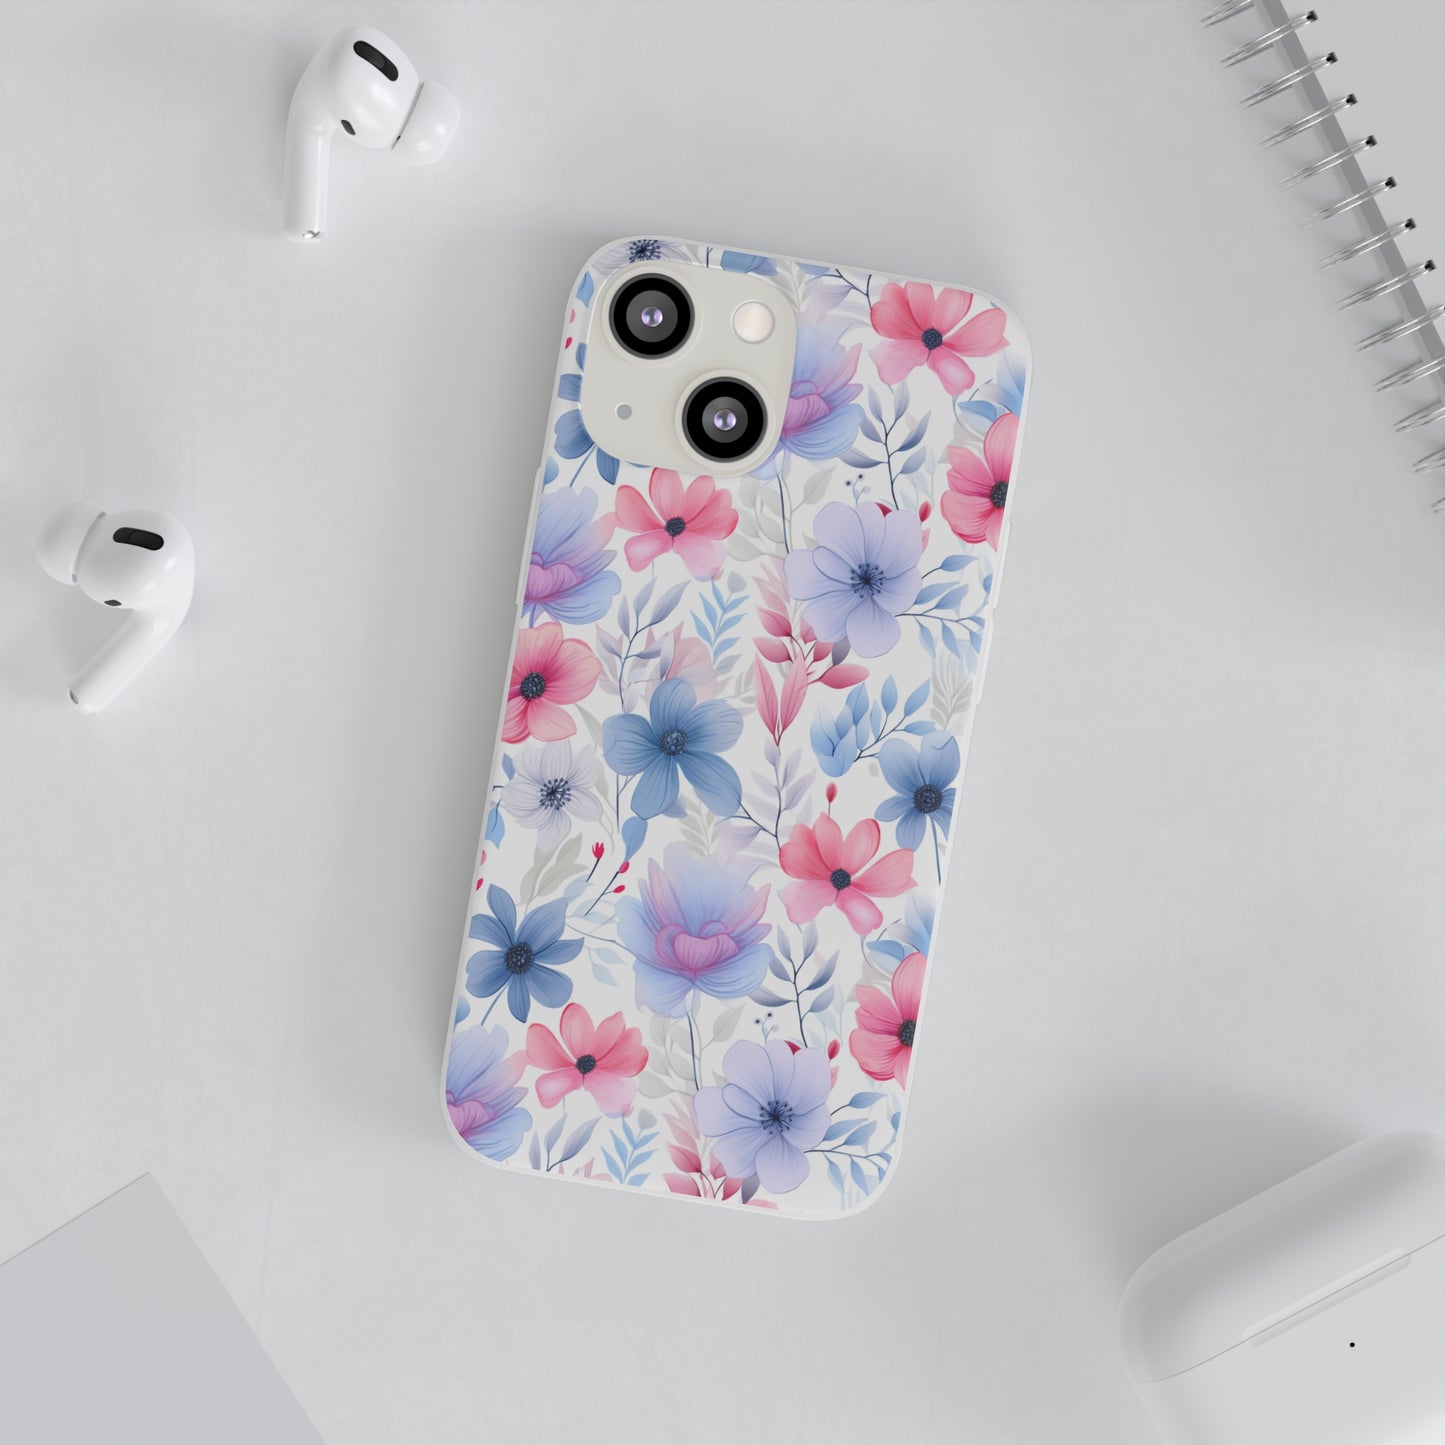 Floral Whispers - Soft Hues of Violets, Pinks, and Blues - Flexi Phone Case Phone Case Pattern Symphony iPhone 13 Mini with gift packaging  